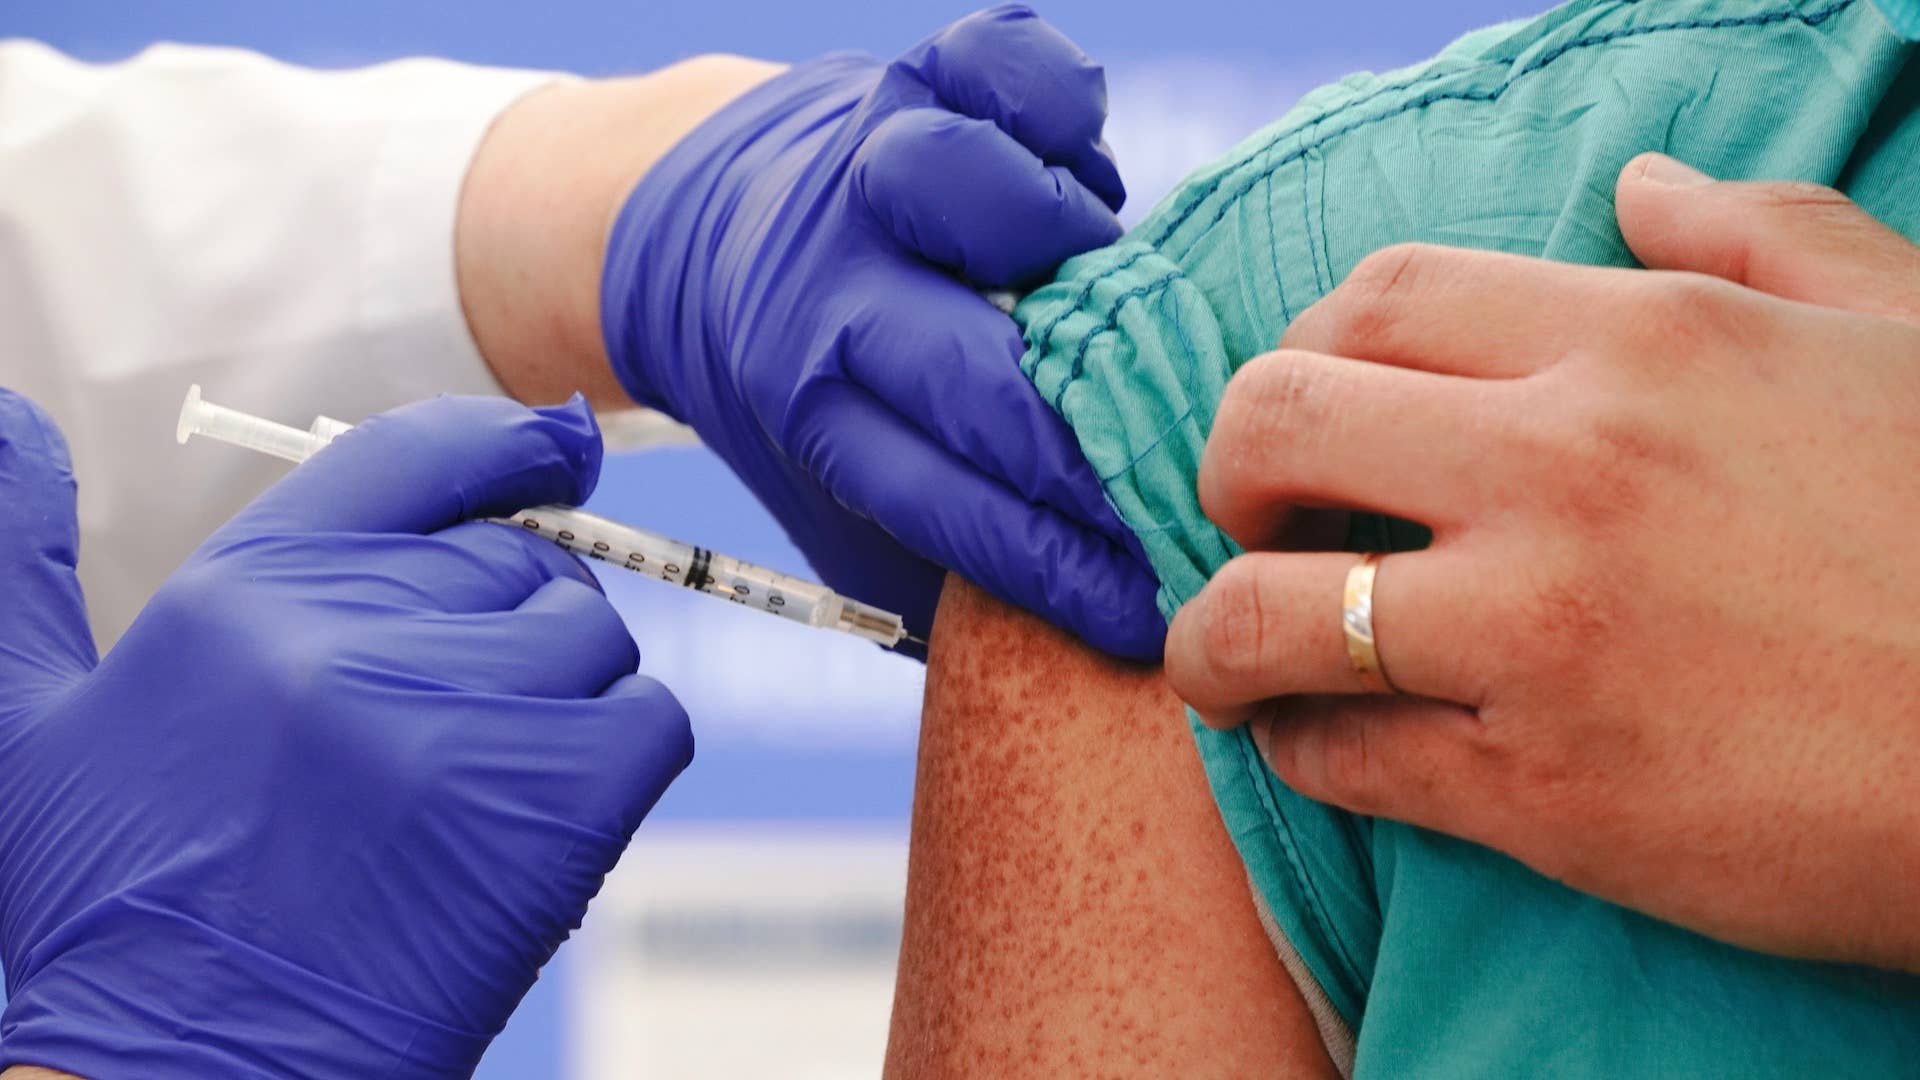 A Florida public health official is put on leave after emailing his staff to urge vaccination.